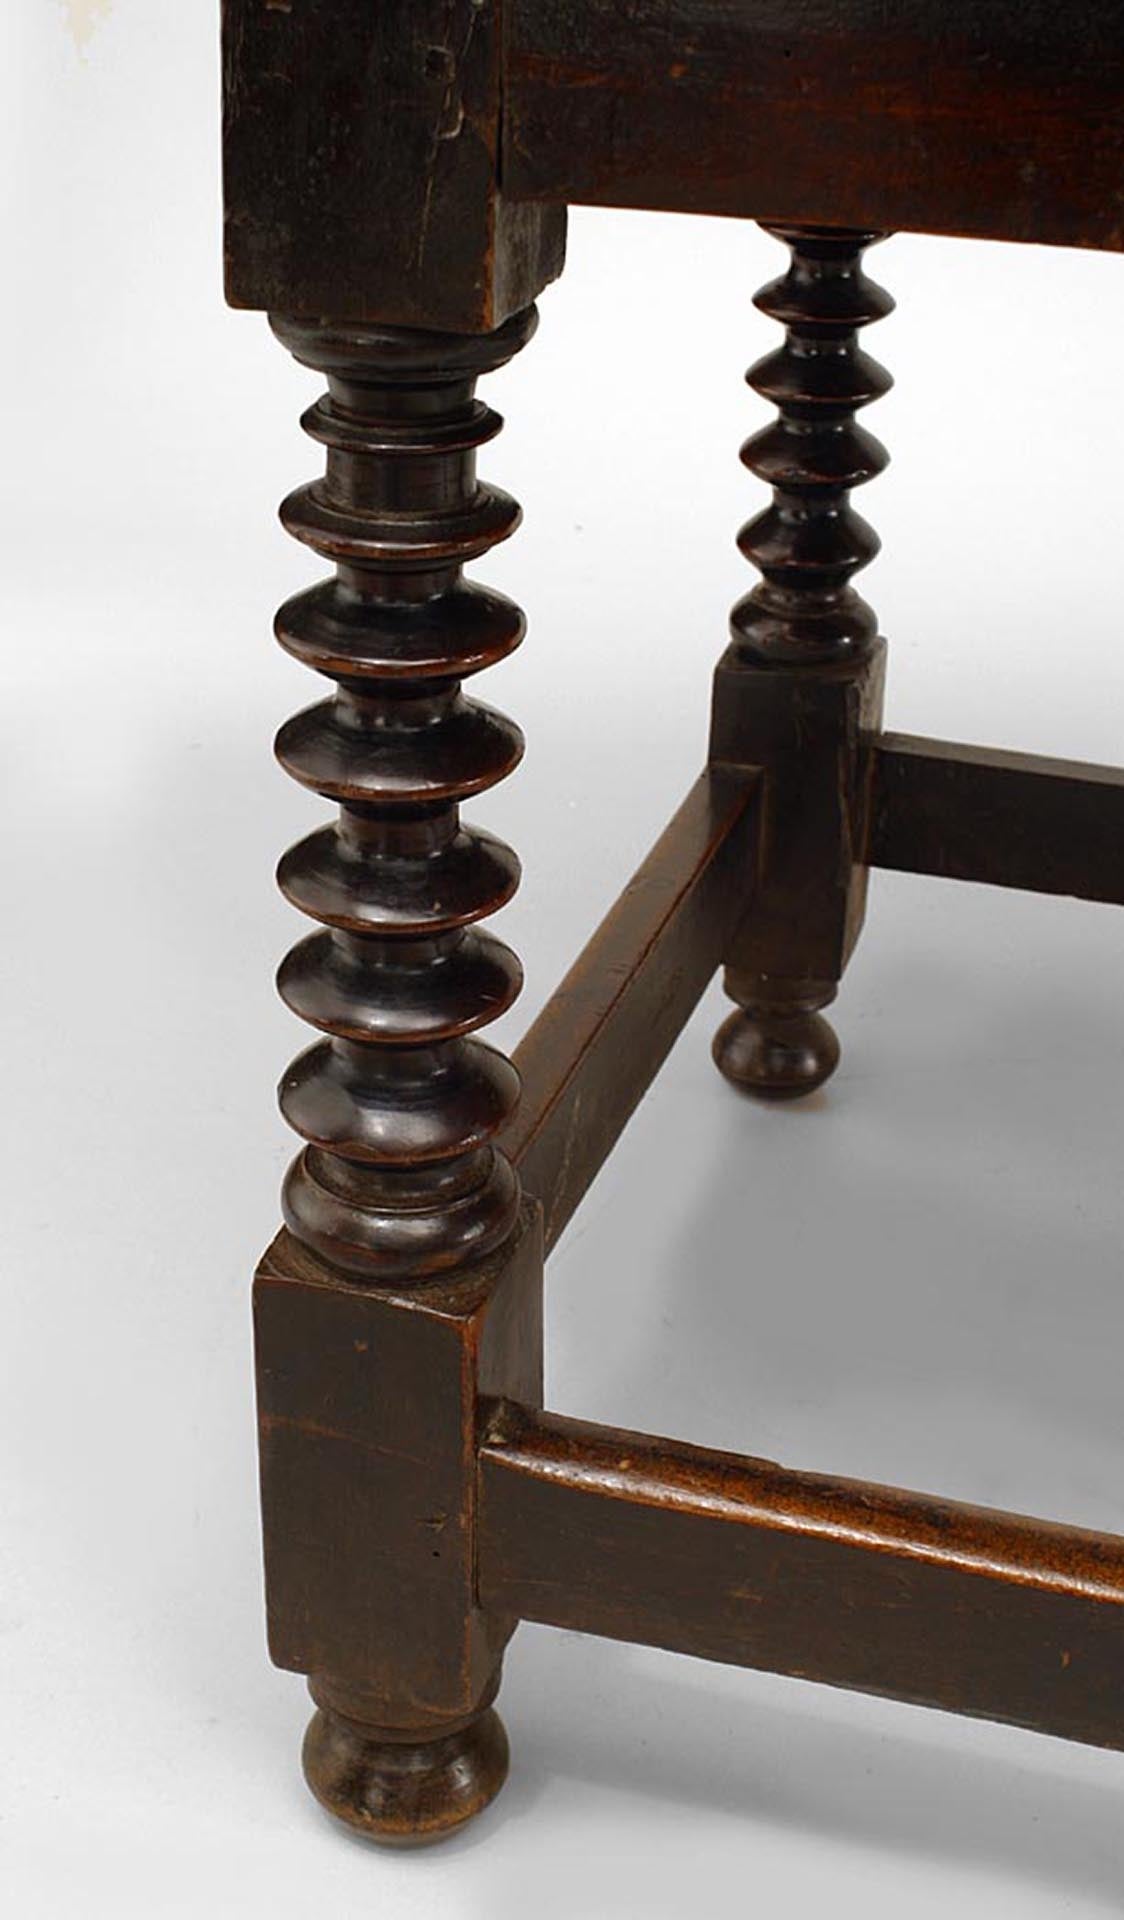 English Renaissance (17th Century) walnut table desk with spool legs and 2 drawers with stretcher.
